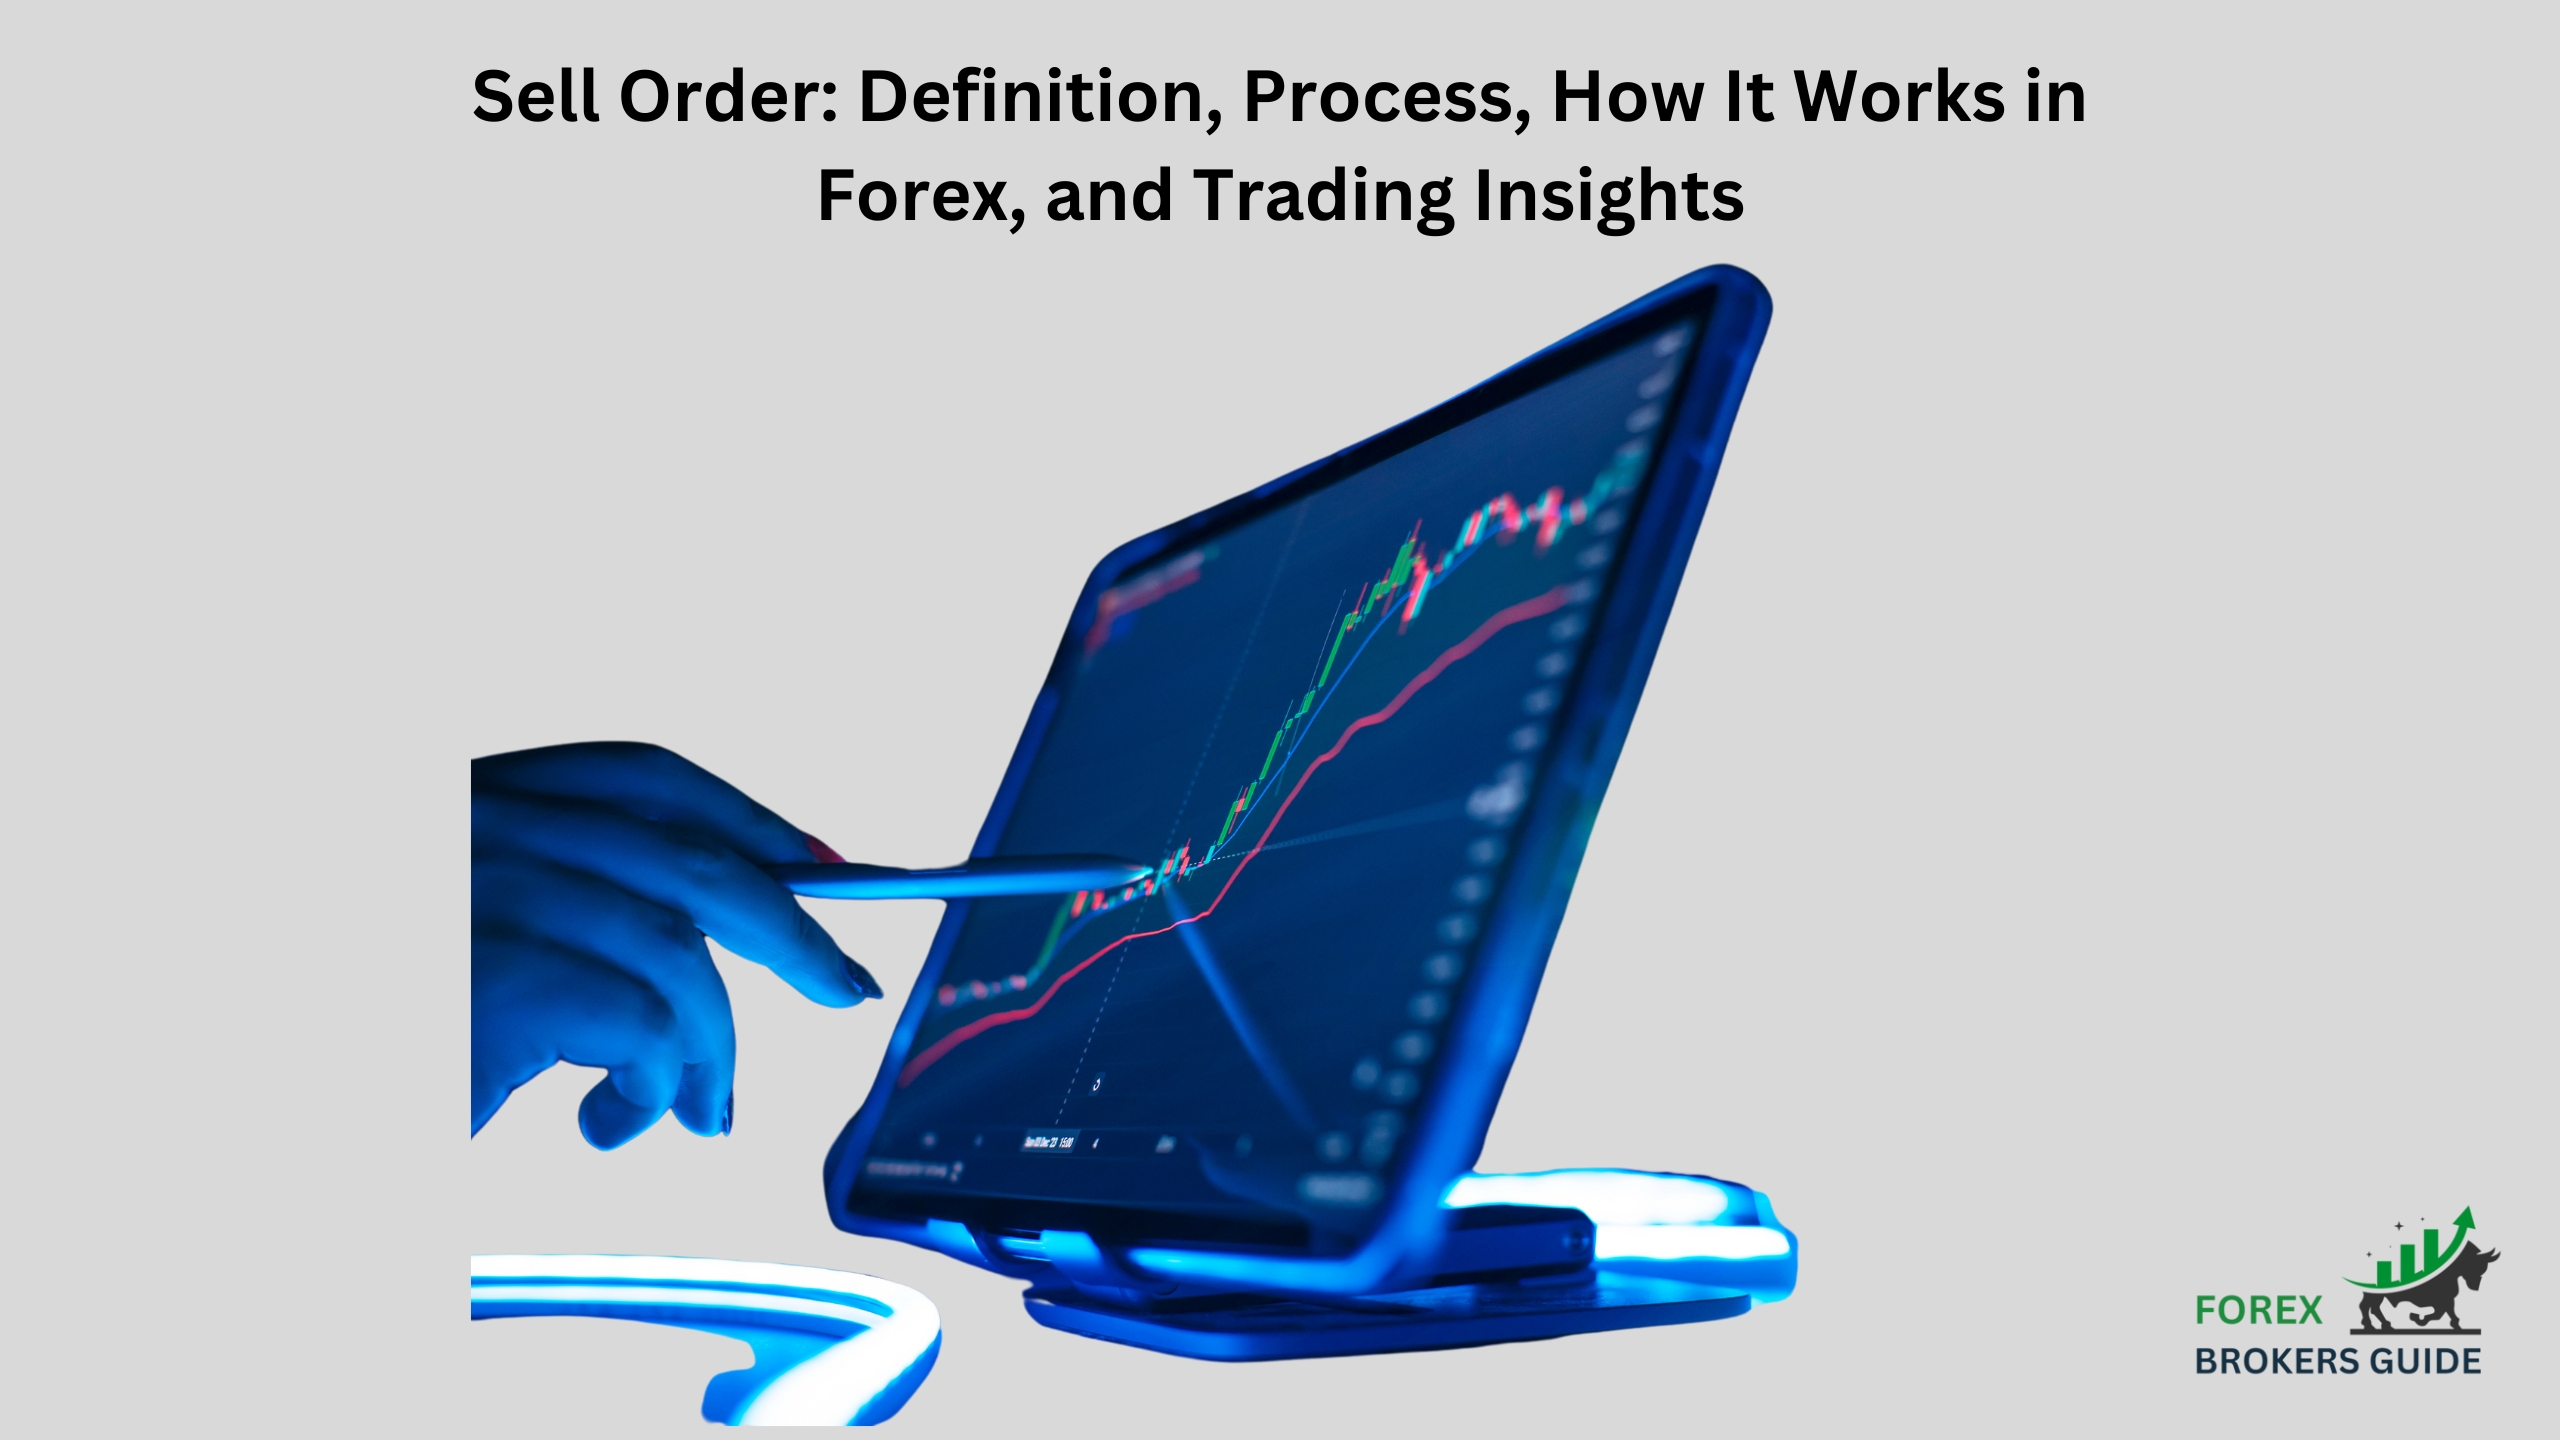 Sell Order Definition, Process, How It Works in Forex, and Trading Insights